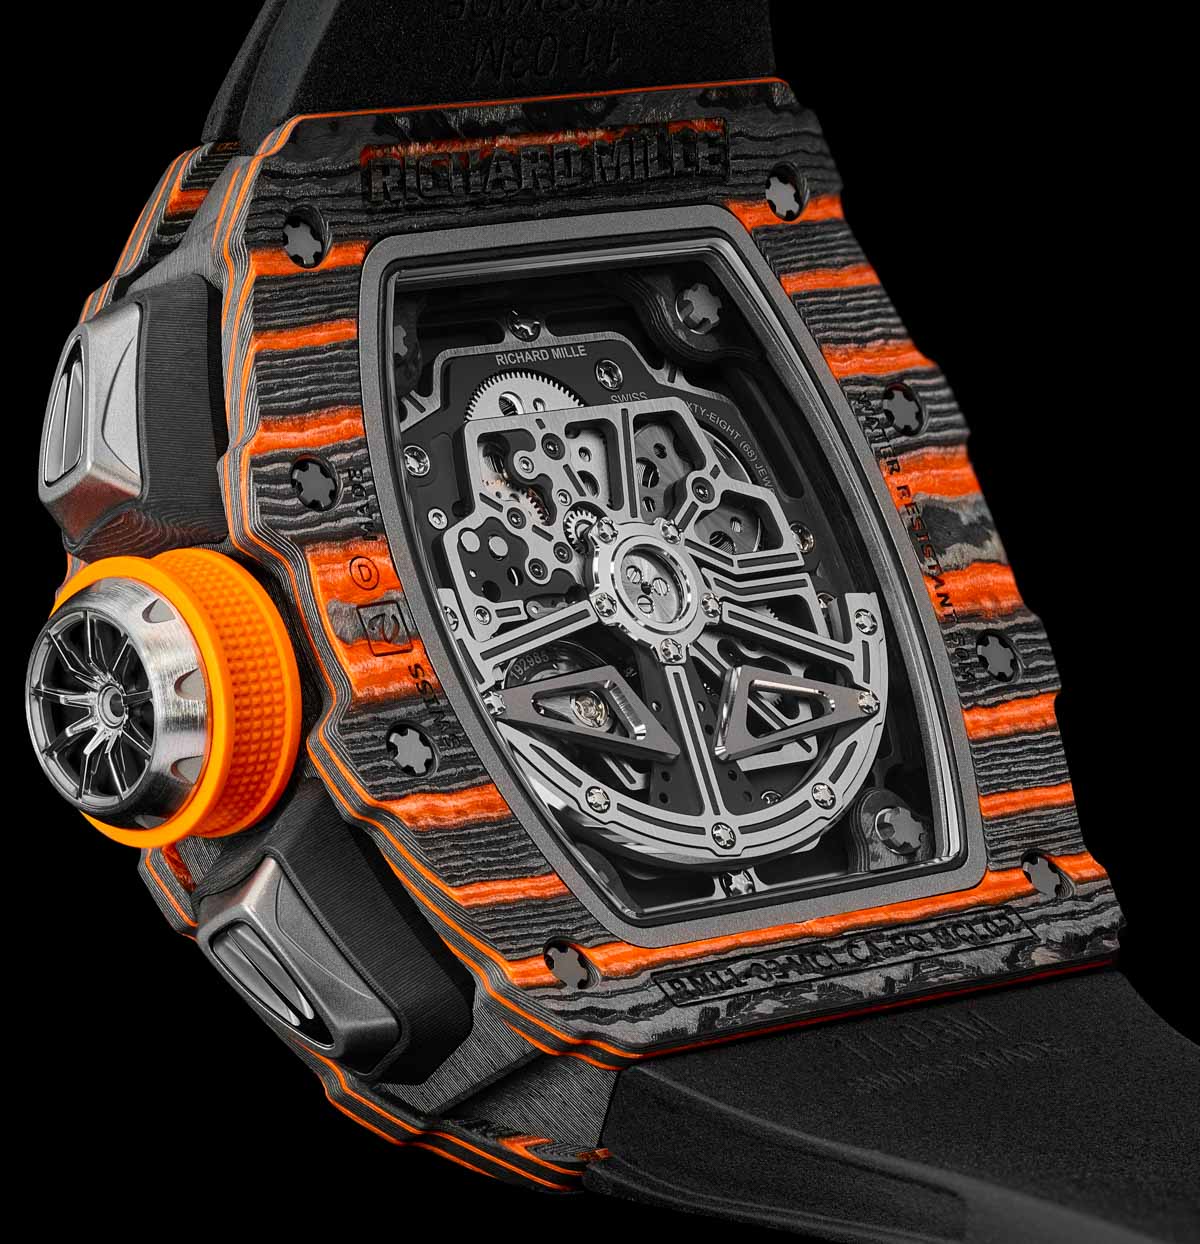 Richard Mille RM 11-03 McLaren Automatic Flyback Chronograph Watch Releases 